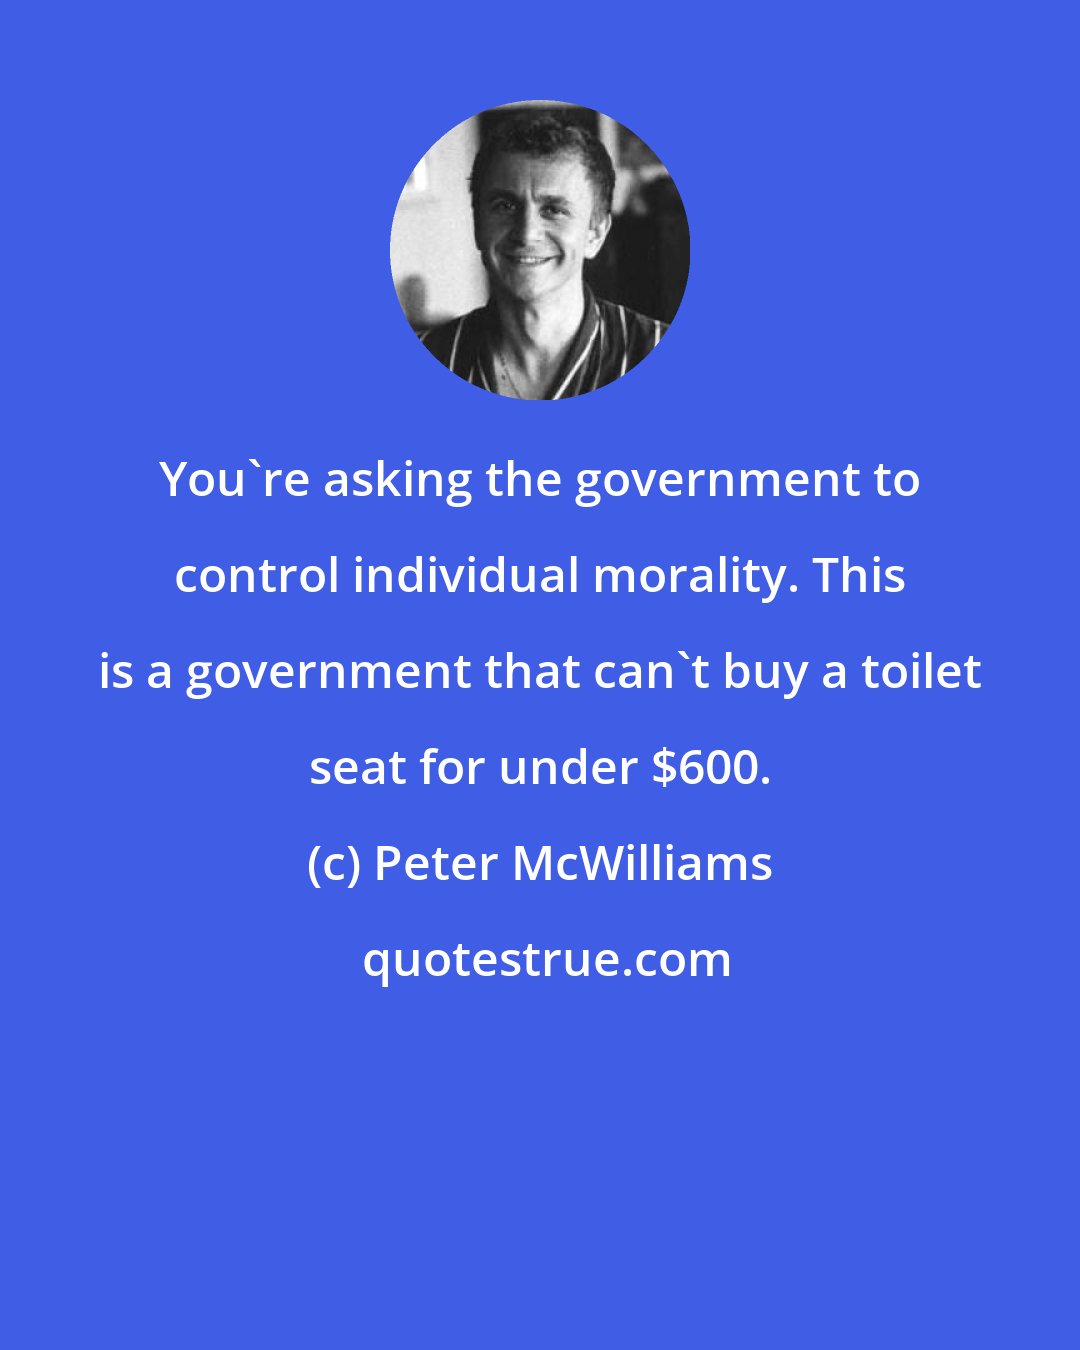 Peter McWilliams: You're asking the government to control individual morality. This is a government that can't buy a toilet seat for under $600.